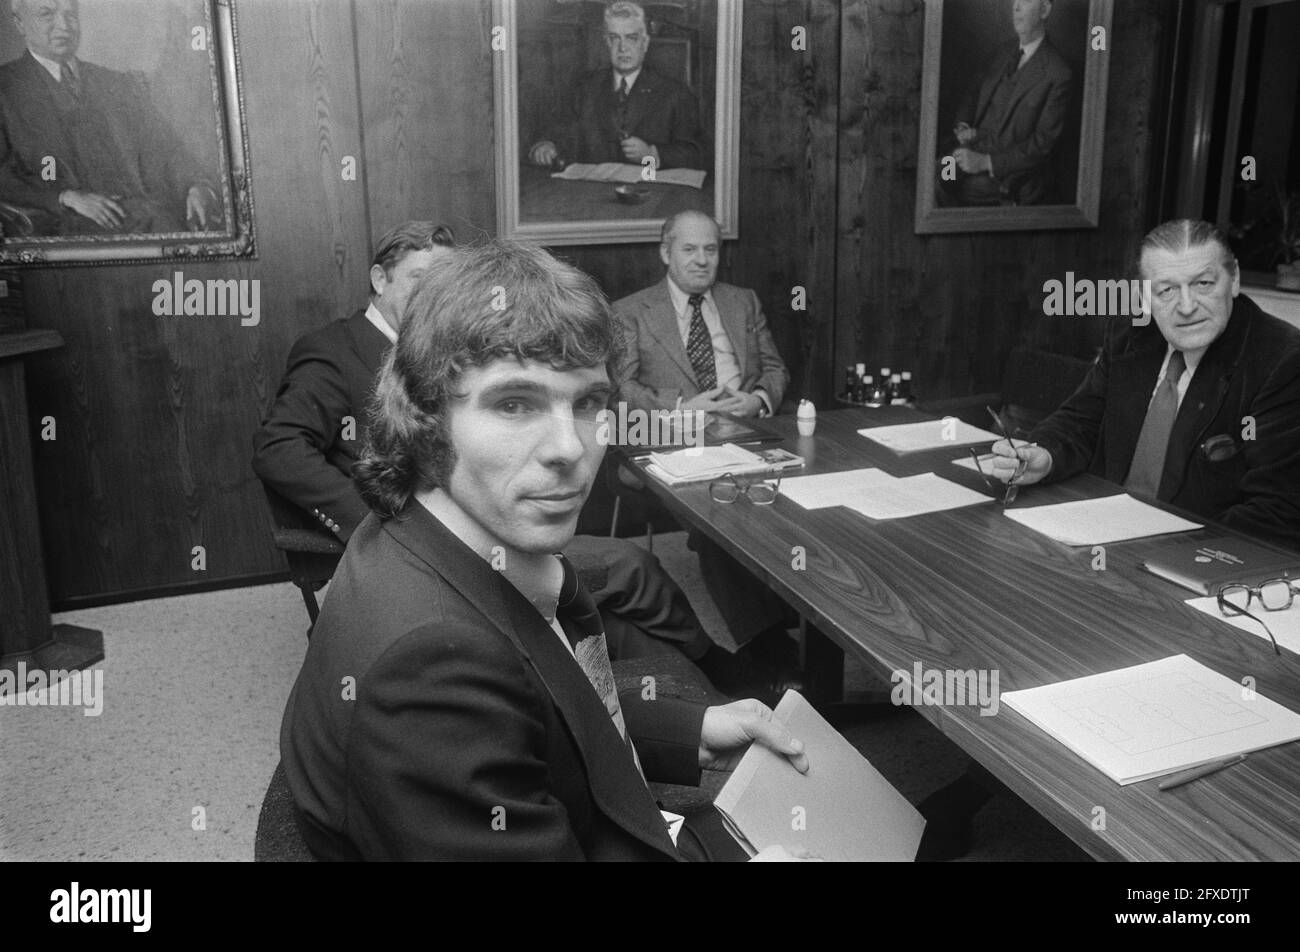 KNVB disciplinary committee handles case against Drost and Van Hanegem in Zeist; Wim van Hanegem (r) and Epi Drost (l) during treatment, 10 January 1975, sports, soccer players, The Netherlands, 20th century press agency photo, news to remember, documentary, historic photography 1945-1990, visual stories, human history of the Twentieth Century, capturing moments in time Stock Photo